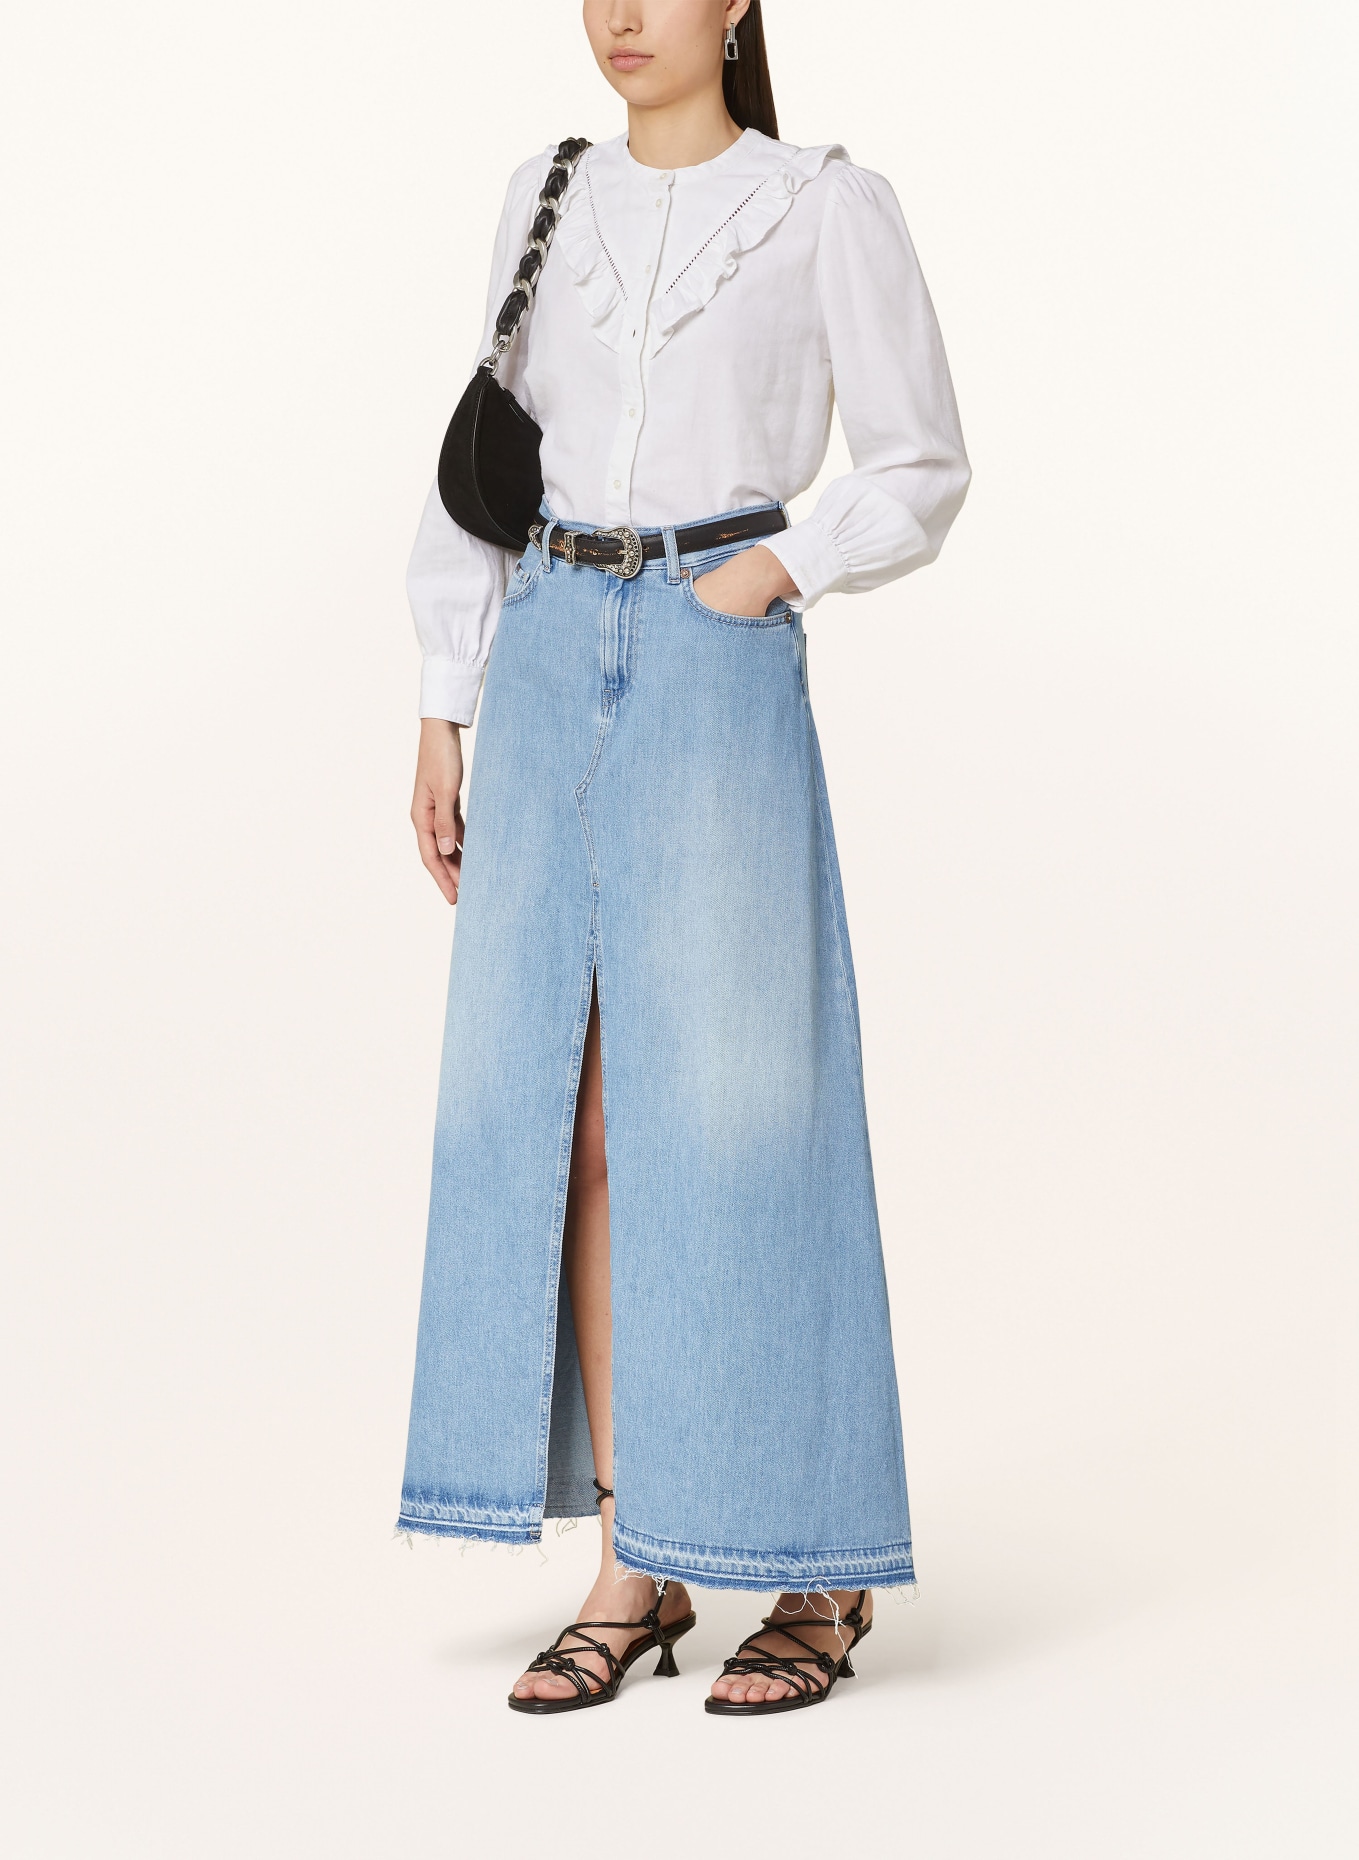 Pepe Jeans Maxi Skirts — choose from 2 items